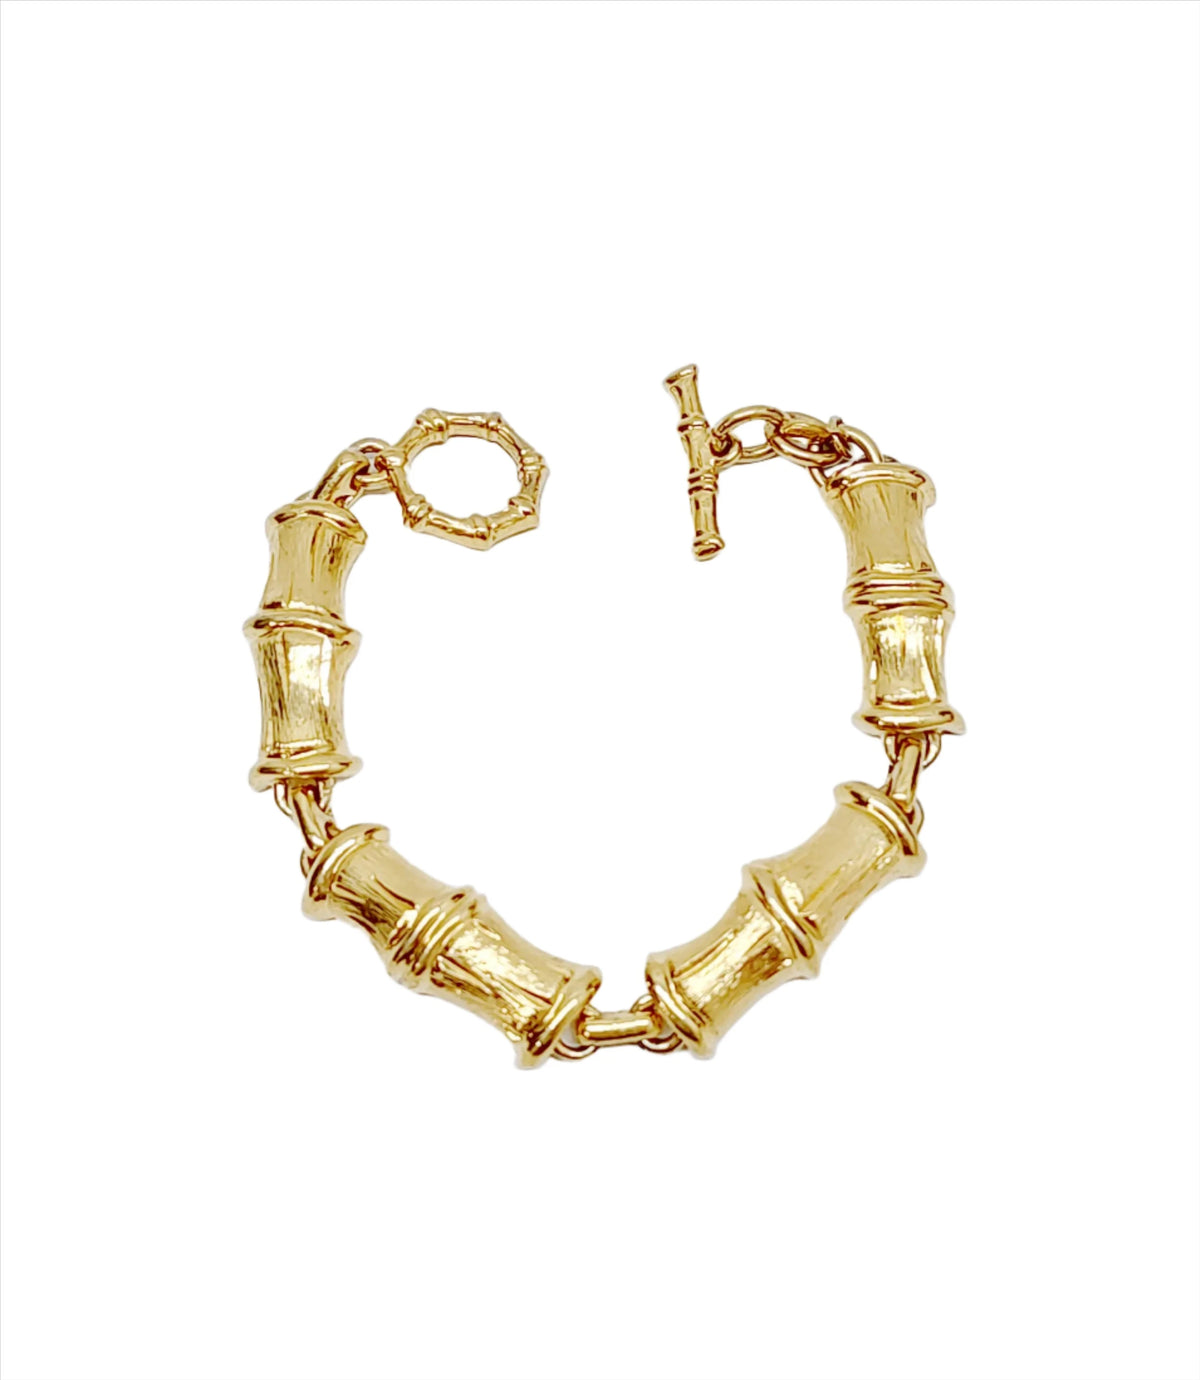 Monet Brushed Gold Tone Bamboo Link Bracelet  - Hers and His Treasures